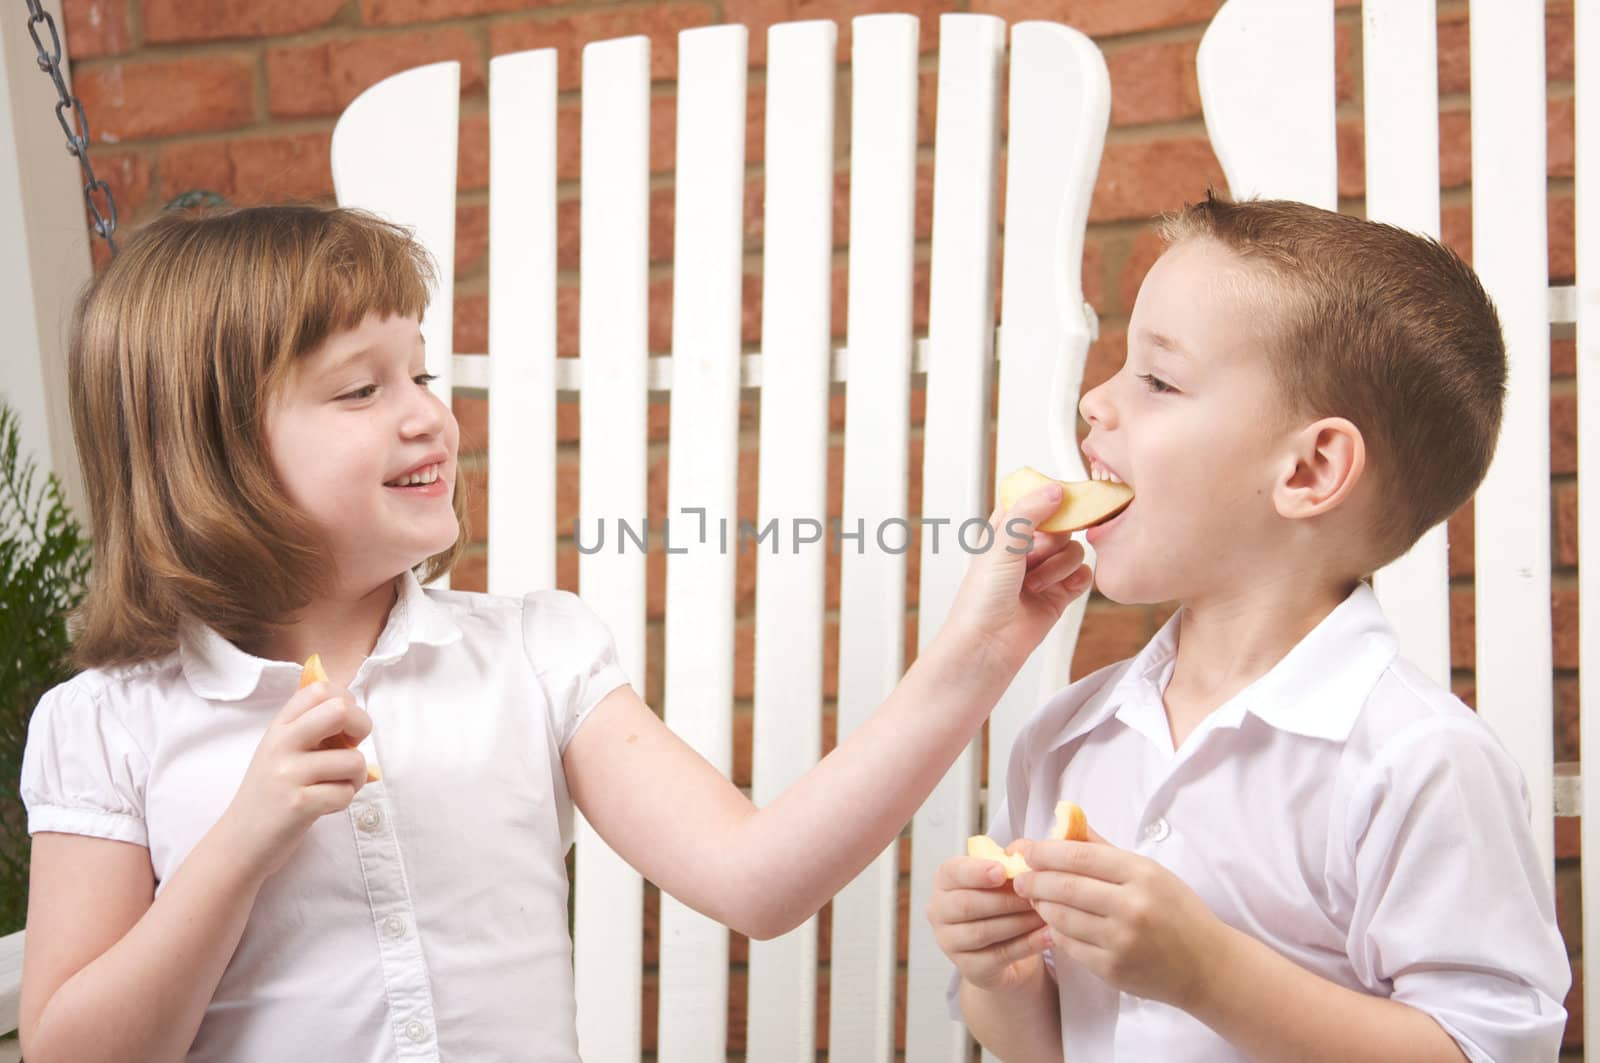 Sister and Brother Having Fun Eating an Apple